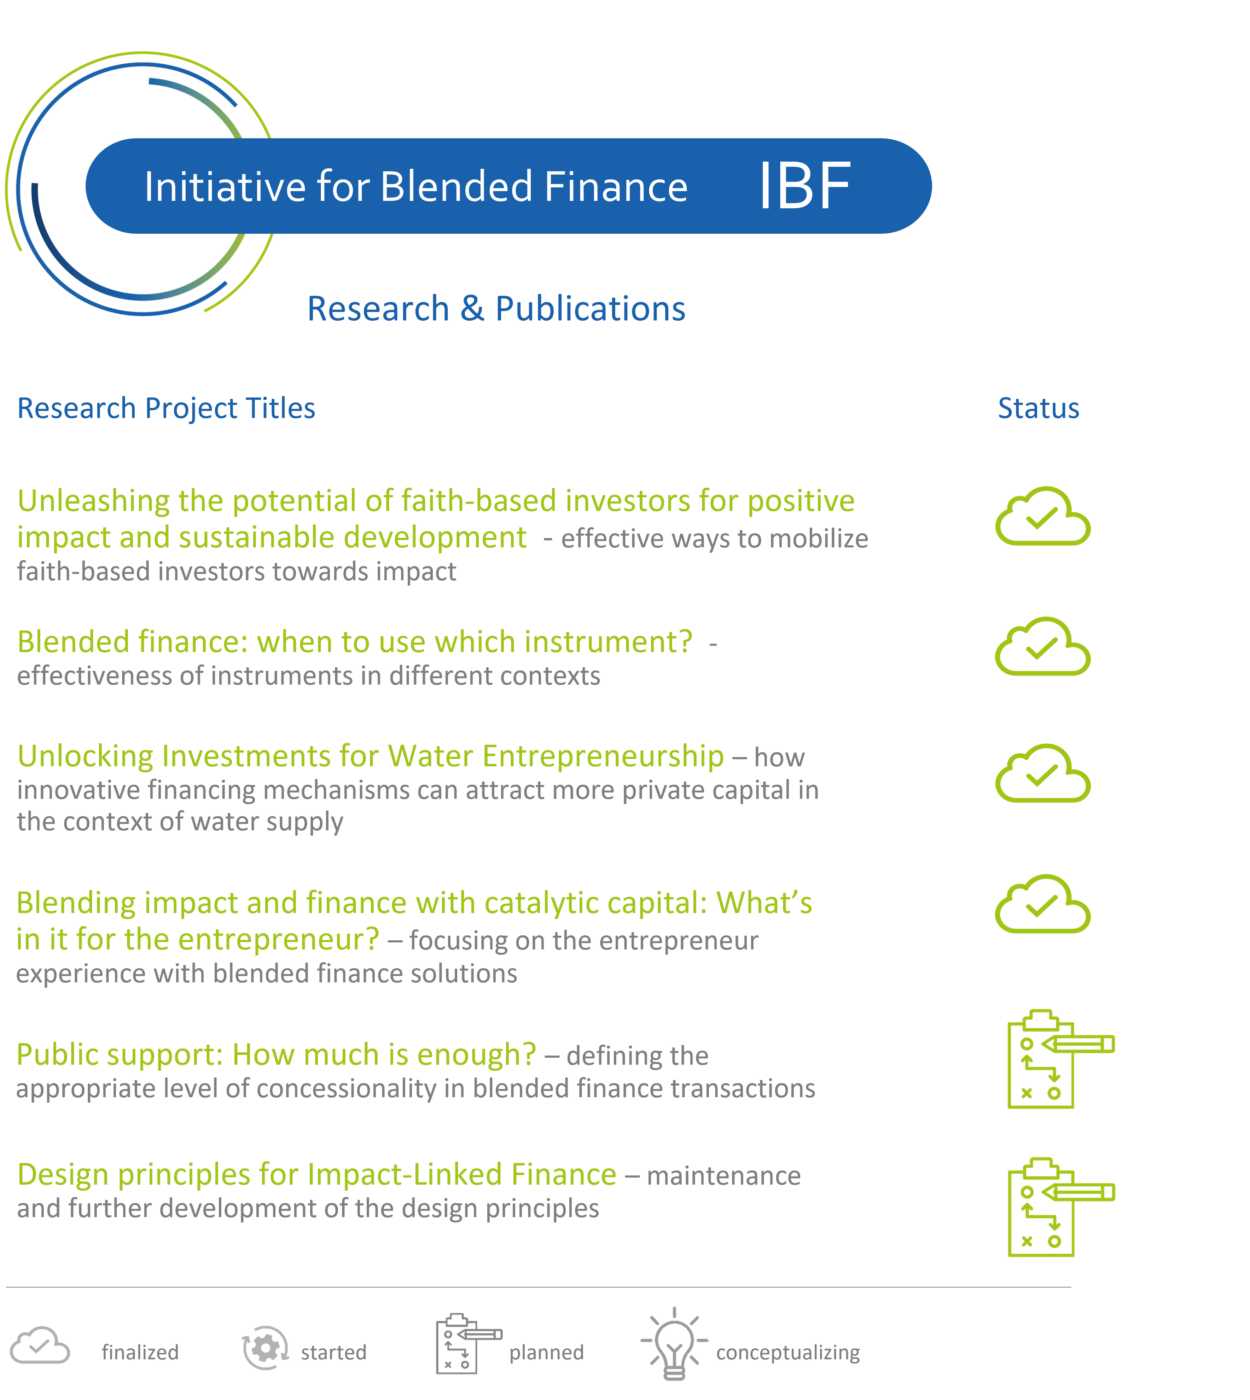 IBF Research & Publications 12-2022